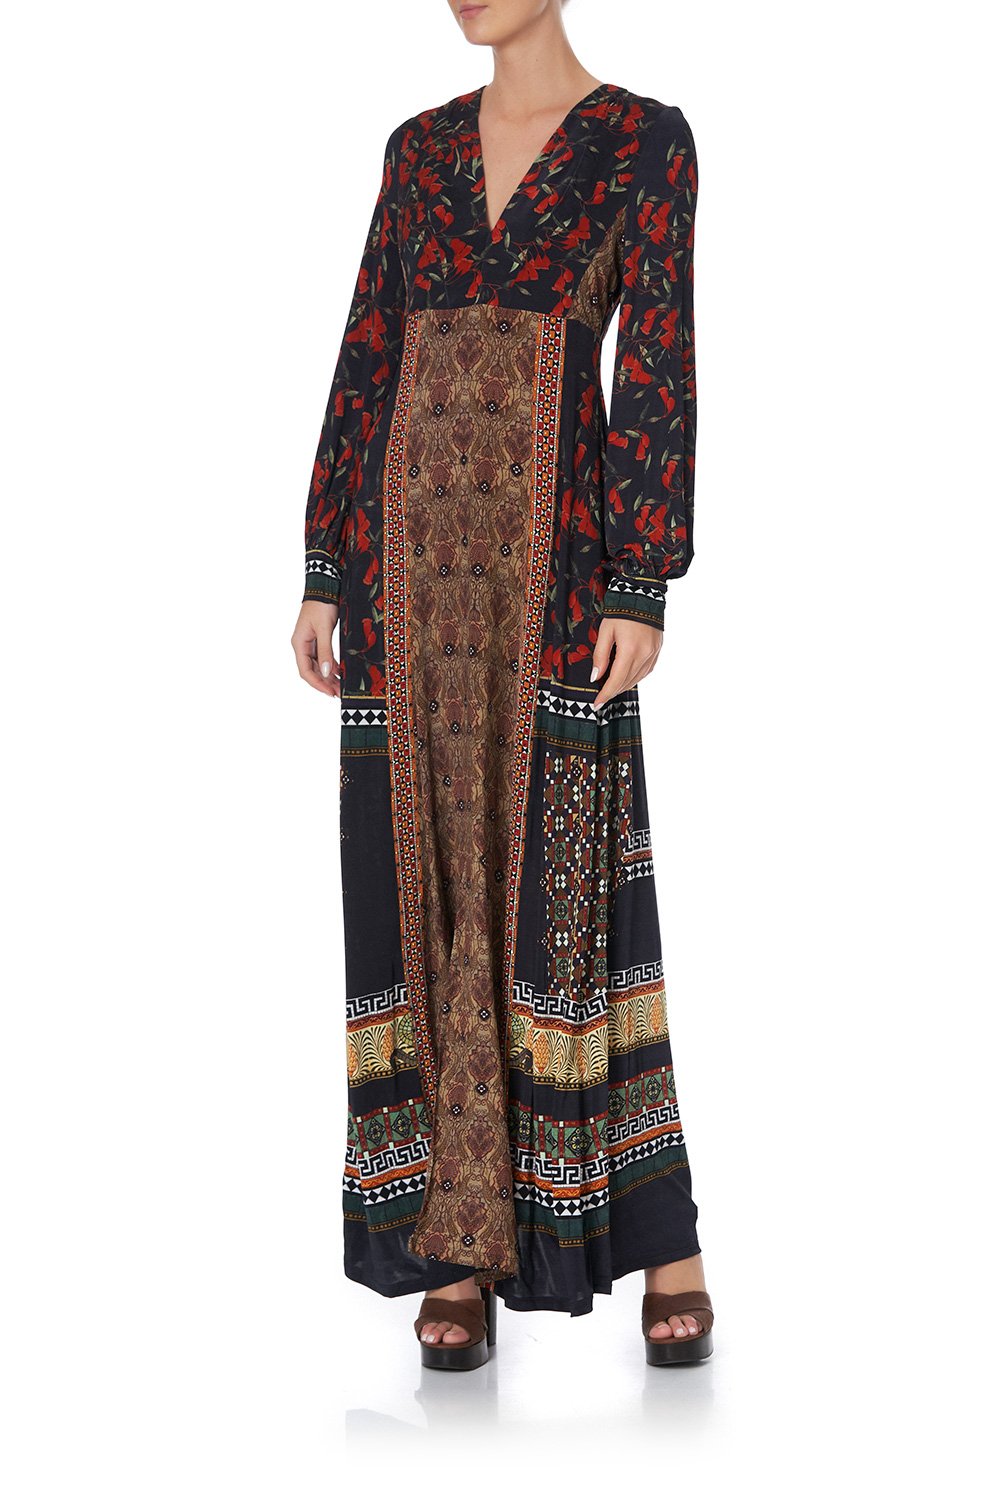 V NECK JERSEY DRESS WITH TUCK DETAIL PAVED IN PAISLEY – CAMILLA